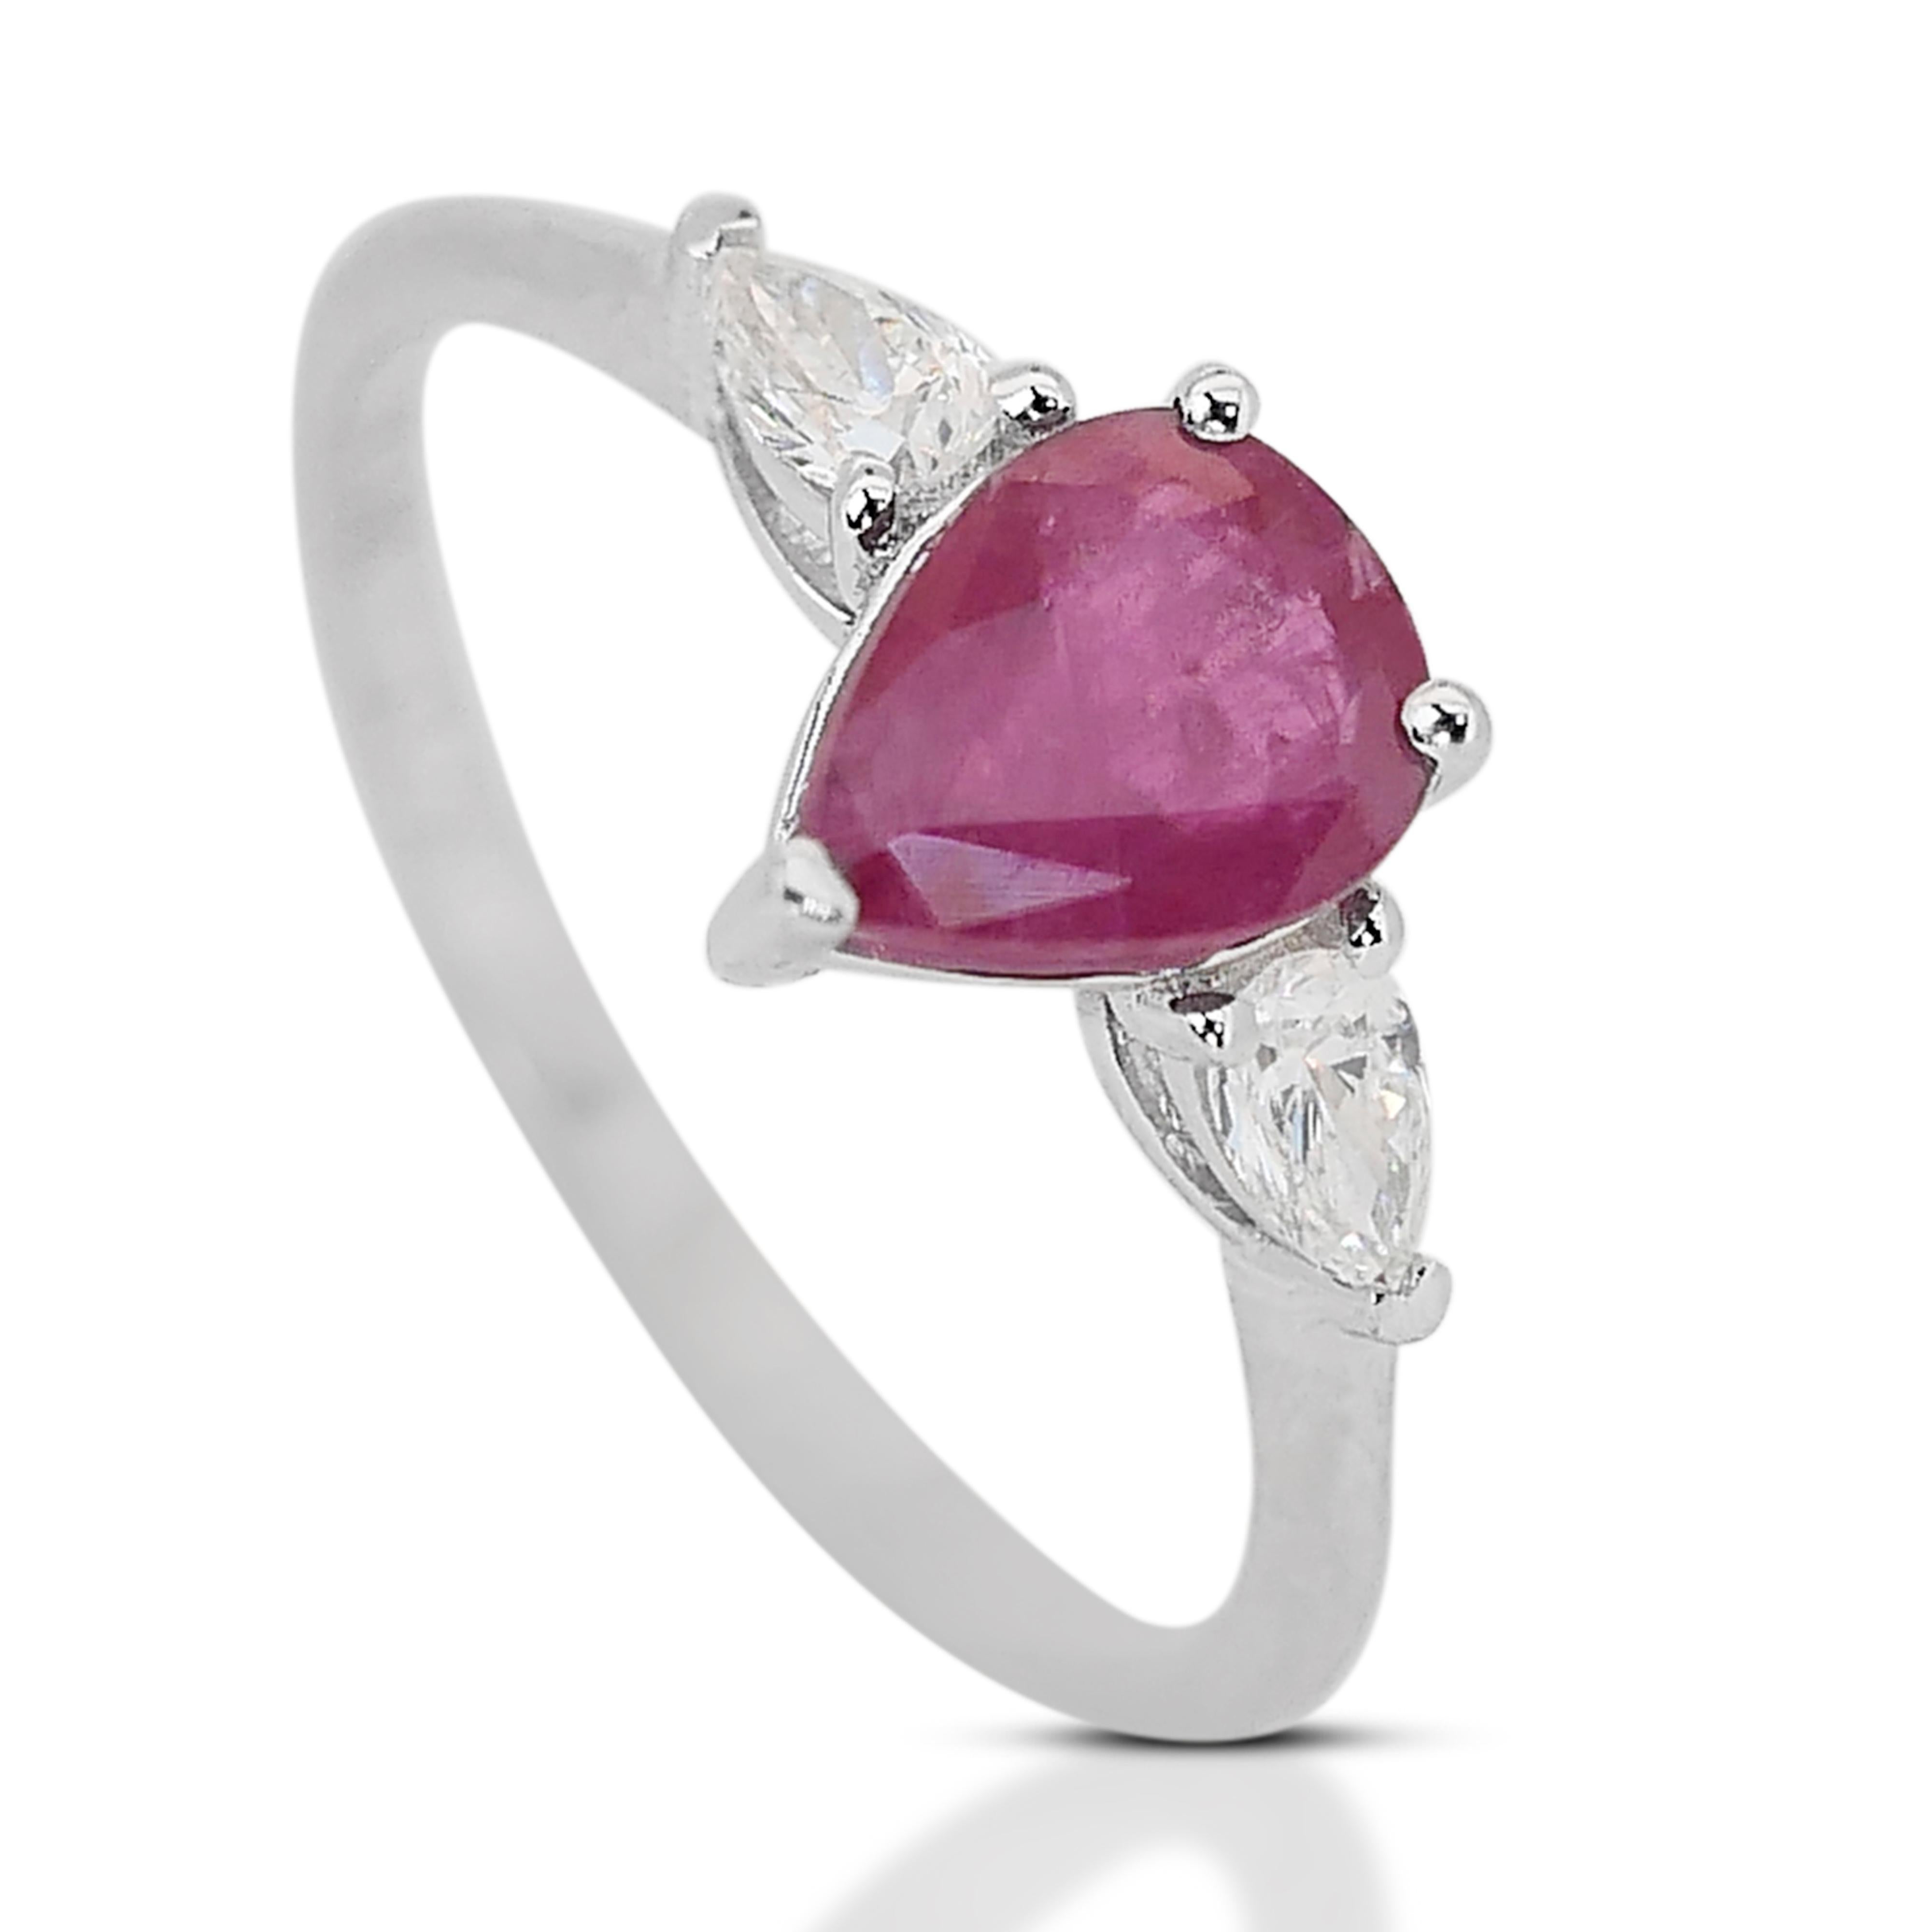 Adorn yourself with this exquisite 3 stone ring, enhancing the allure of the ruby, two pear-cut diamonds grace the sides with a combined weight of 0.30 carats. This precious ring is authenticated through an IGI Certification. 

1 Ruby Main Stone of